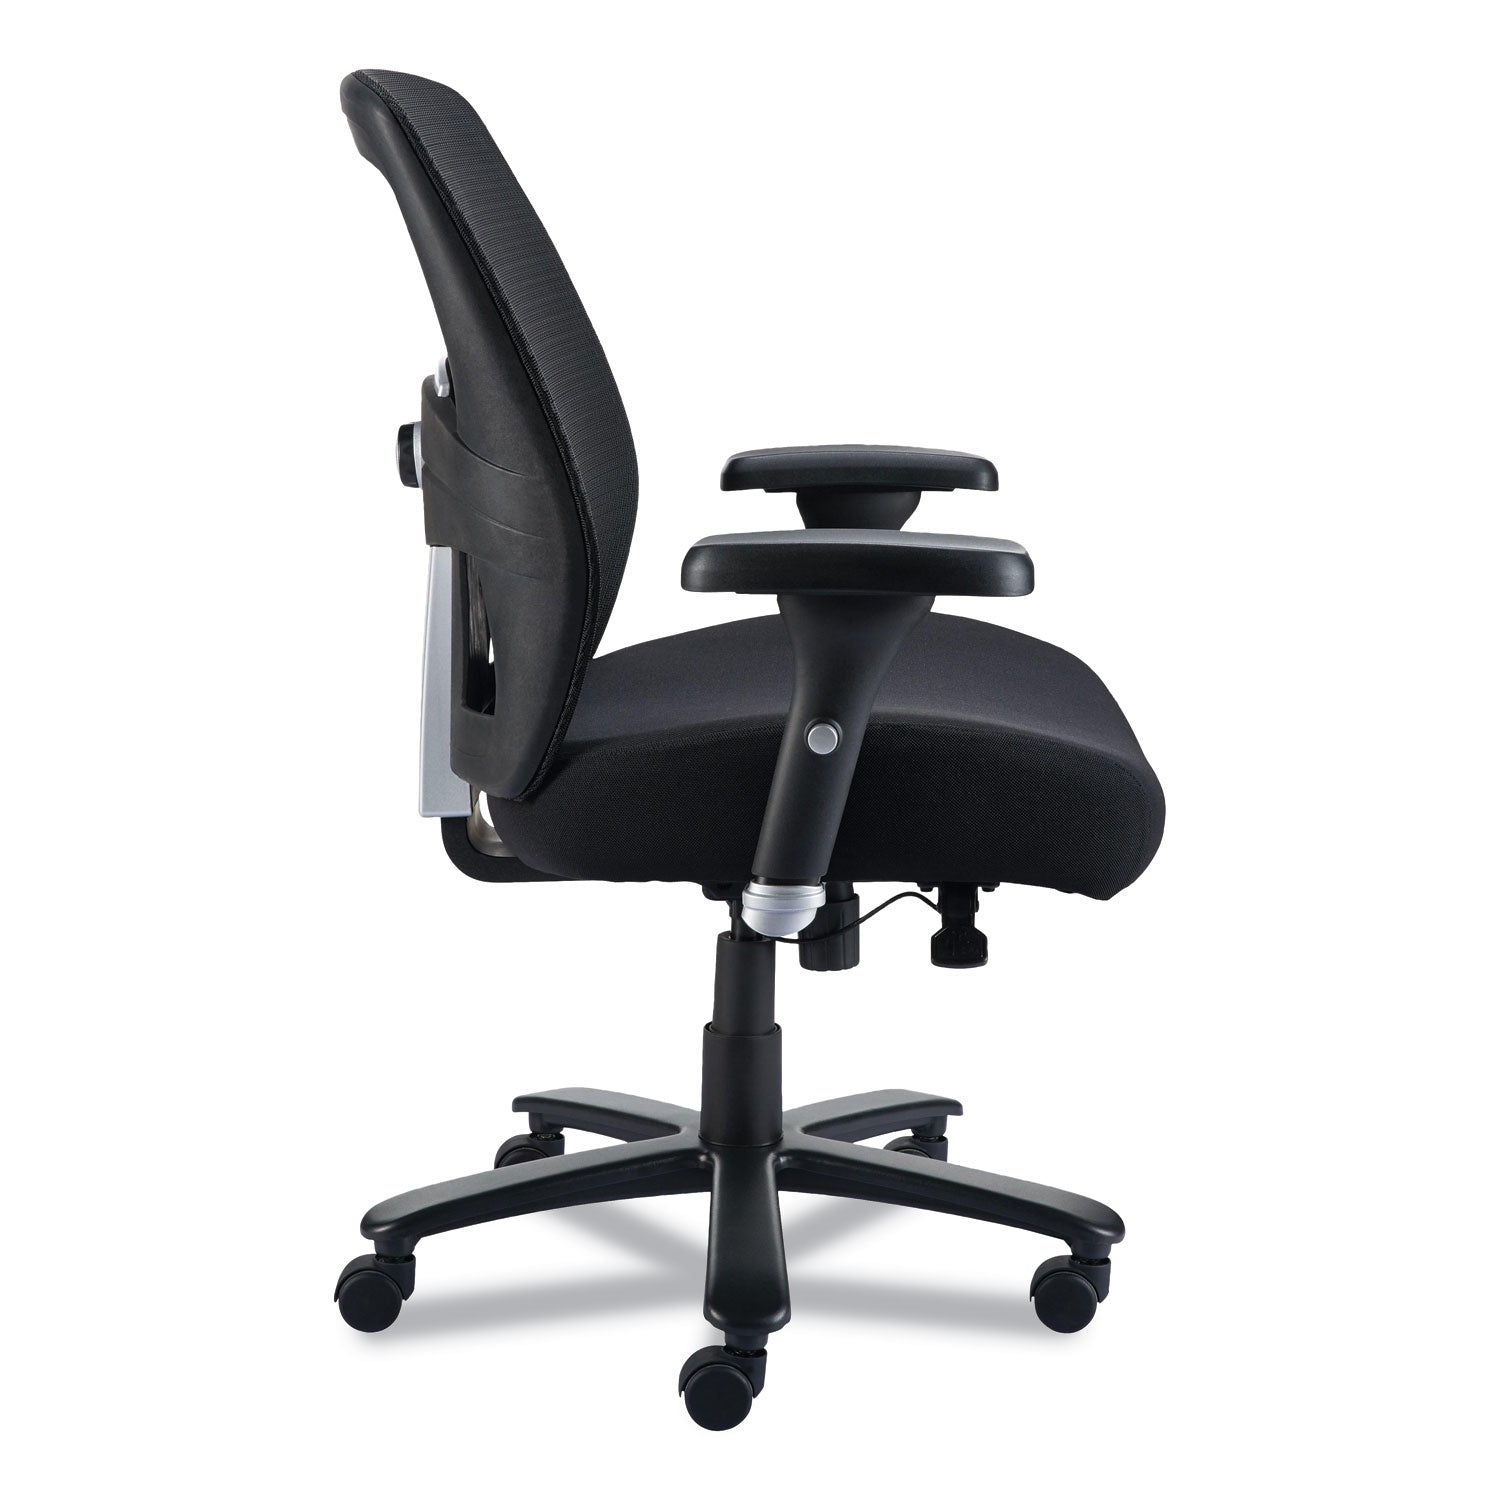 Alera Faseny Series Big and Tall Manager Chair, Supports Up to 400 lbs, 17.48" to 21.73" Seat Height, Black Seat/Back/Base - 2